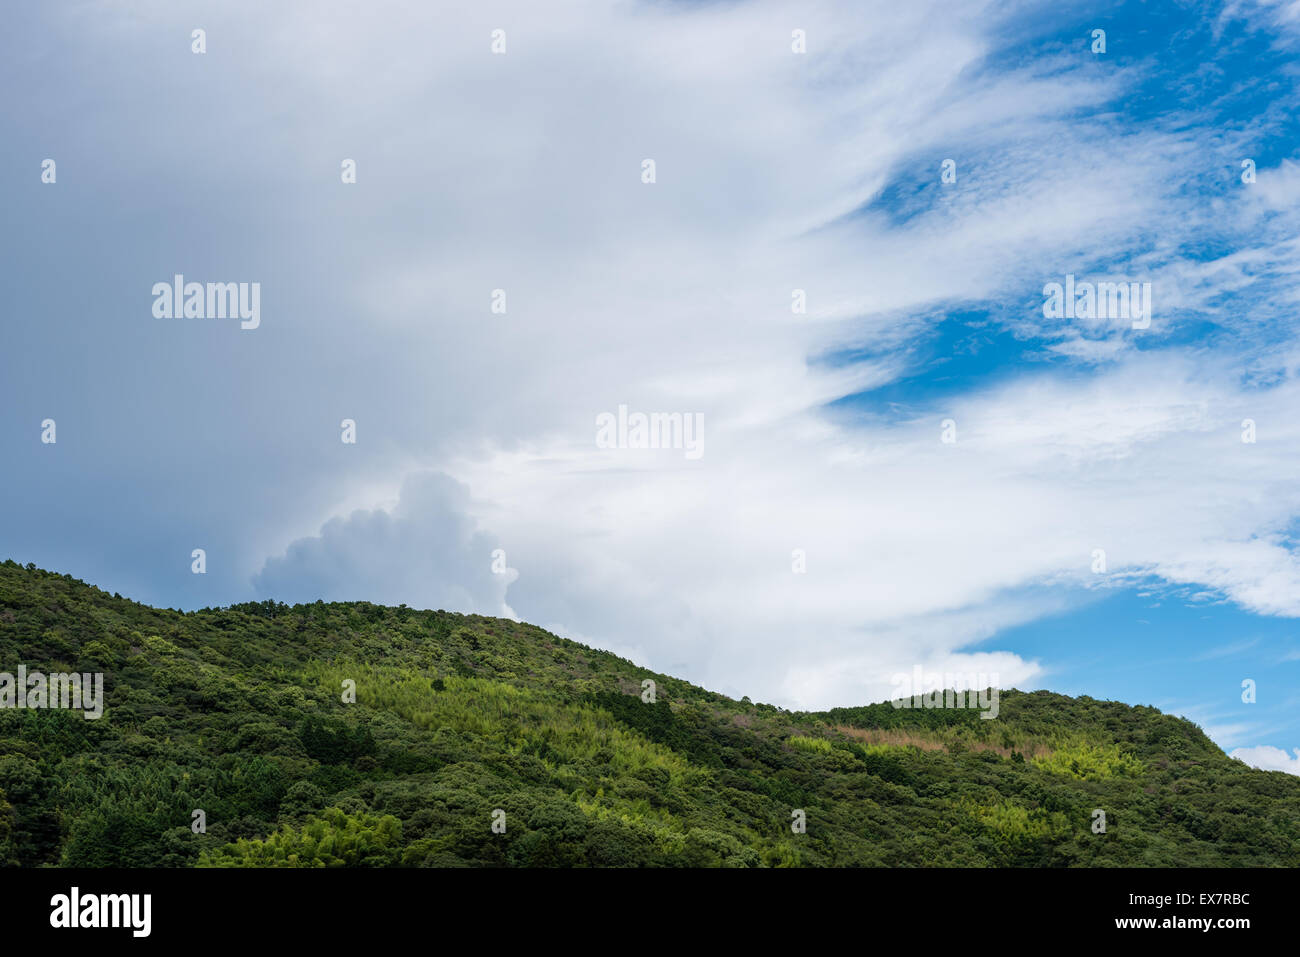 Dark storm clouds creeping in on an otherwise clear blue sky with a green tree filled mountain in the foreground. Stock Photo